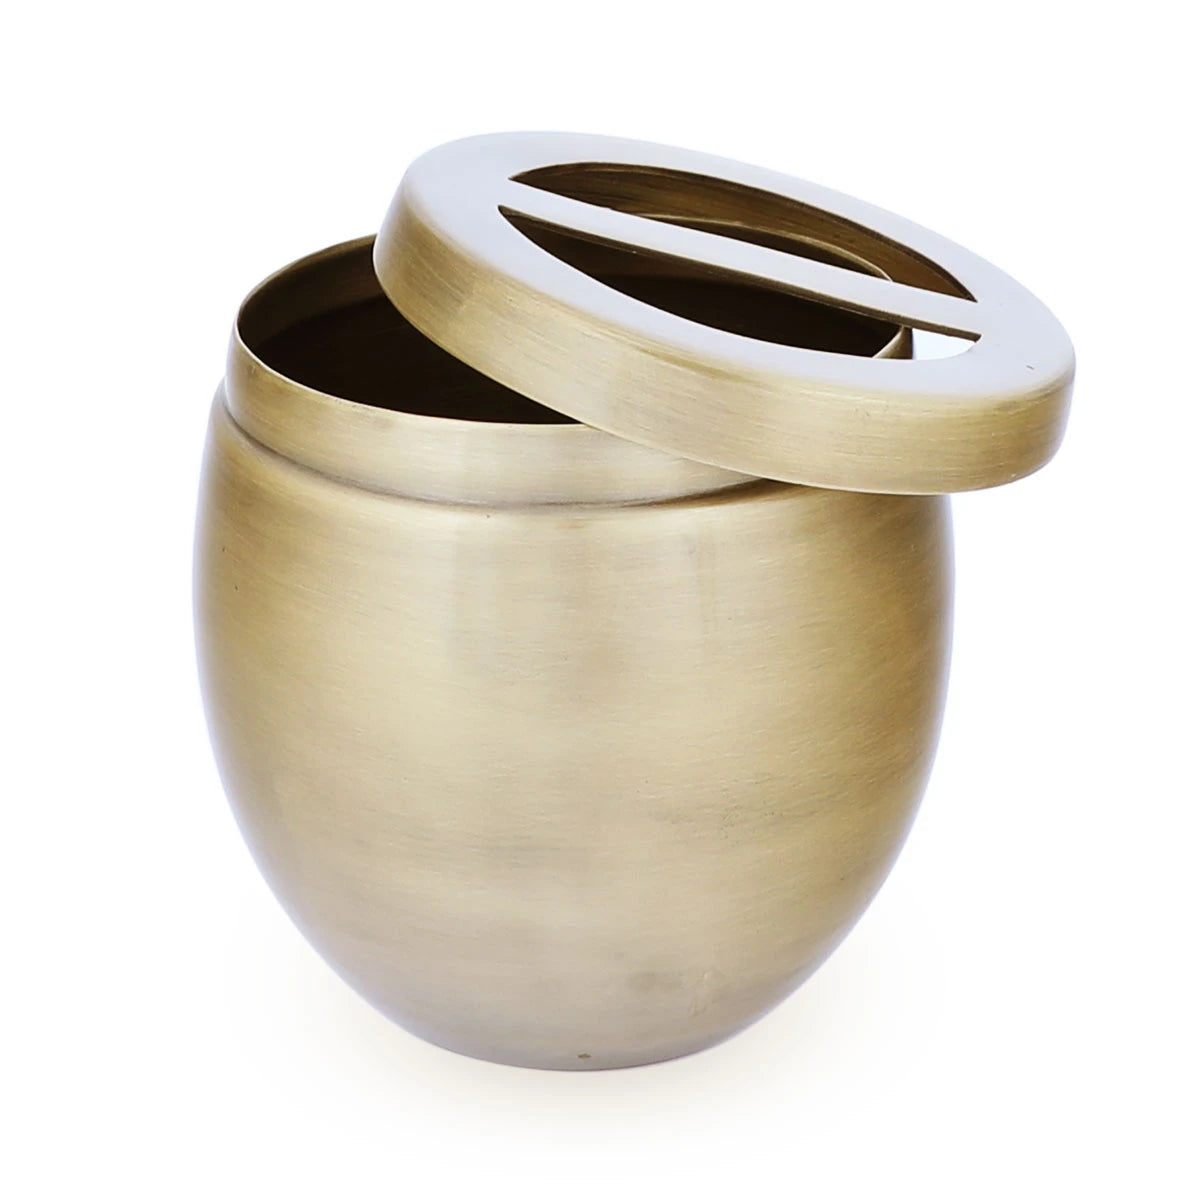 Top Angled View of Gold Colored Brass Metal Toothbrush Holder with Open Lids